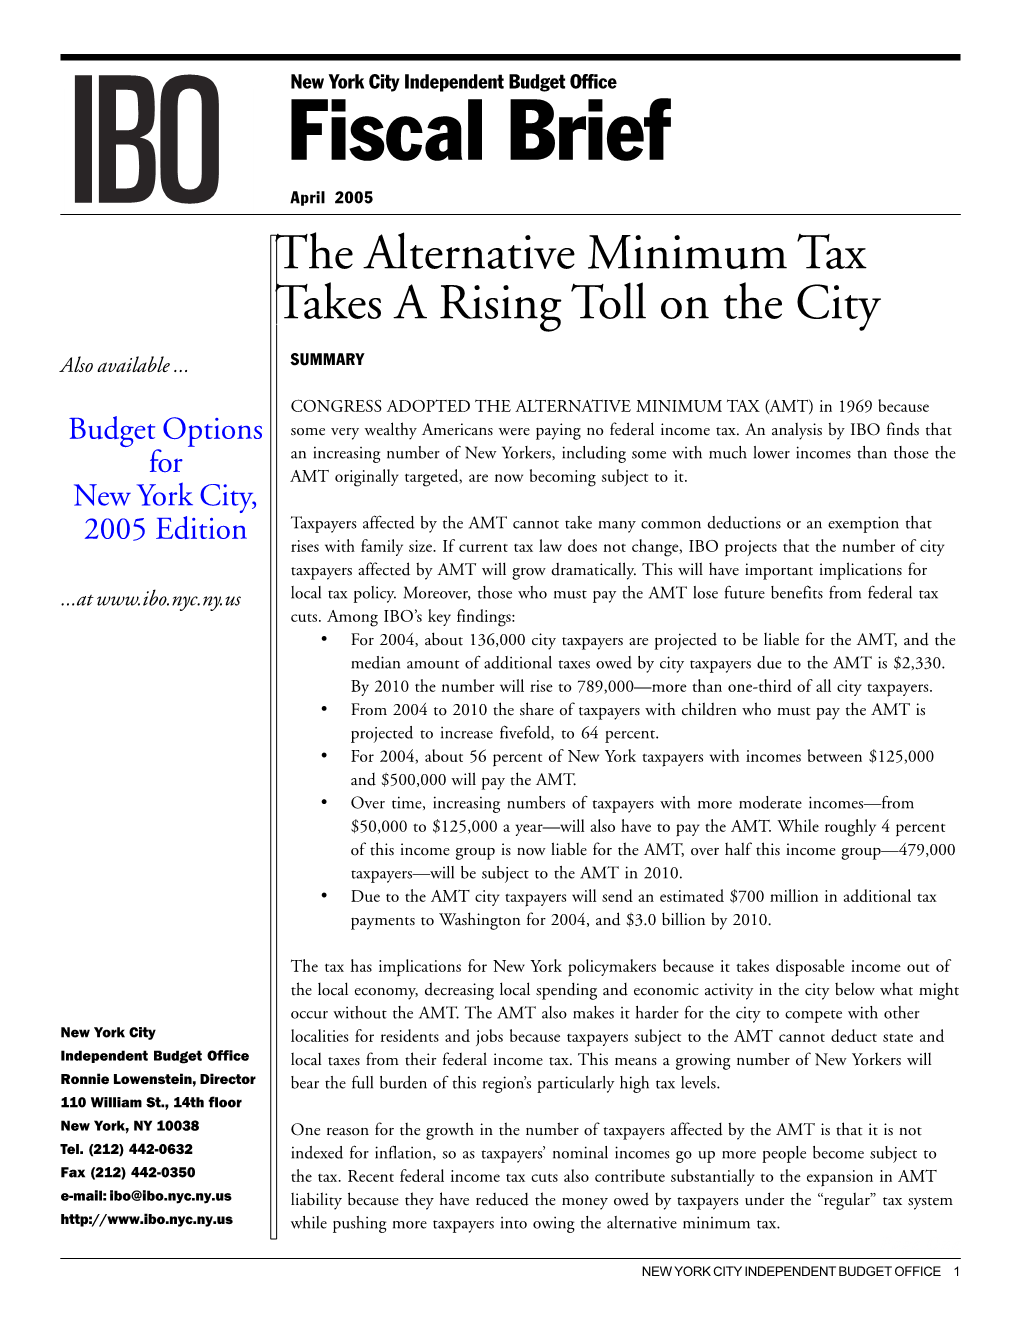 The Alternative Minimum Tax Takes a Rising Toll on the City T Also Available